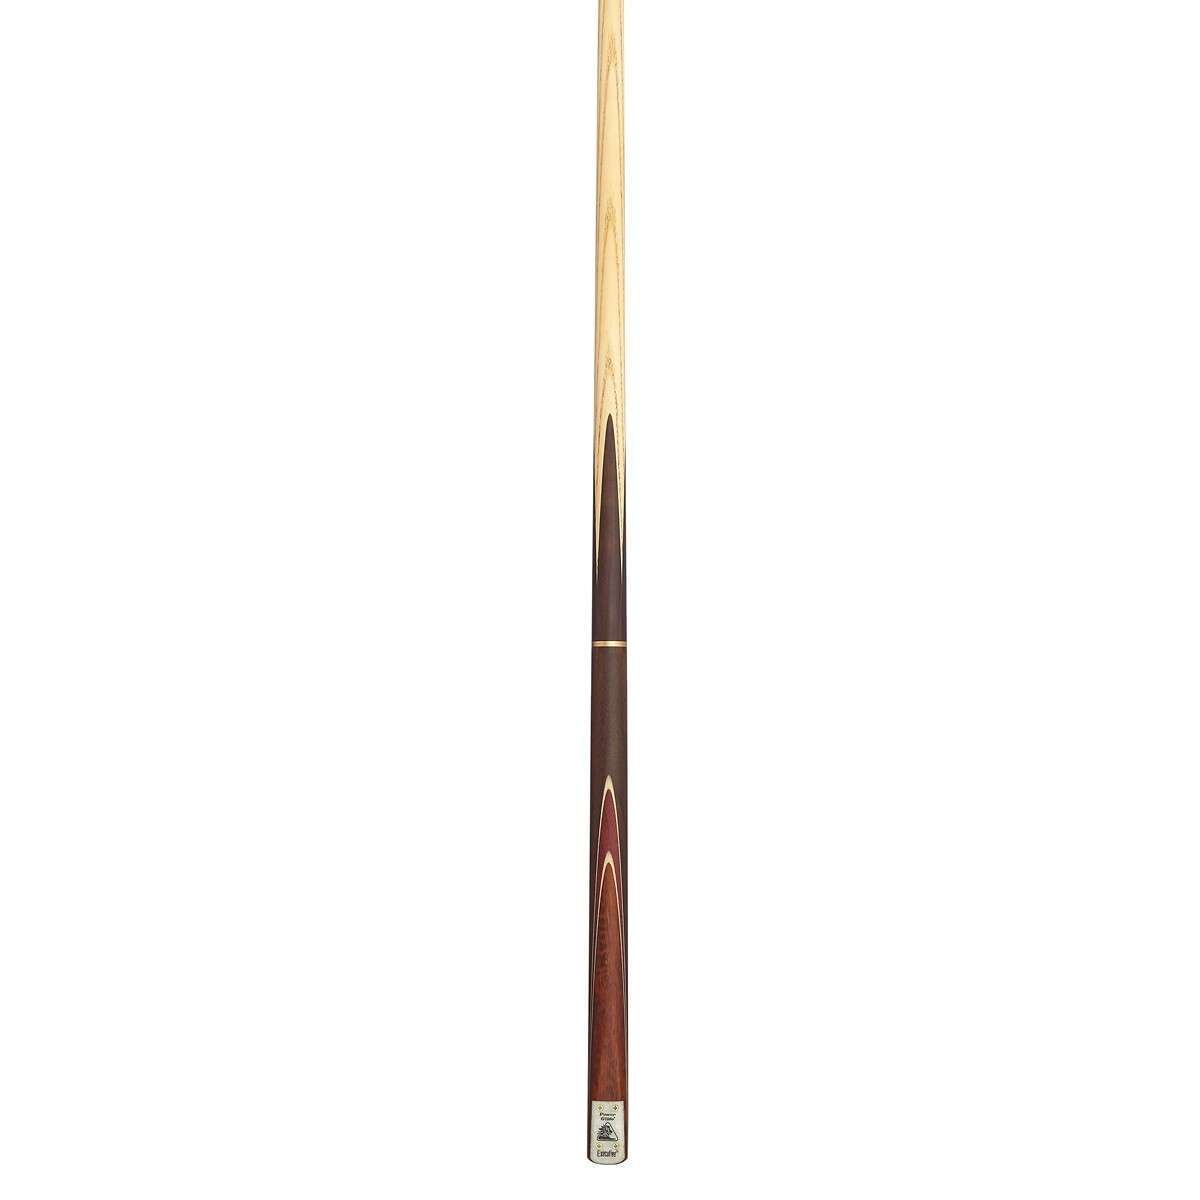 Powerglide Executive Snooker Cue 3/4 Joint 9.5mm Tip